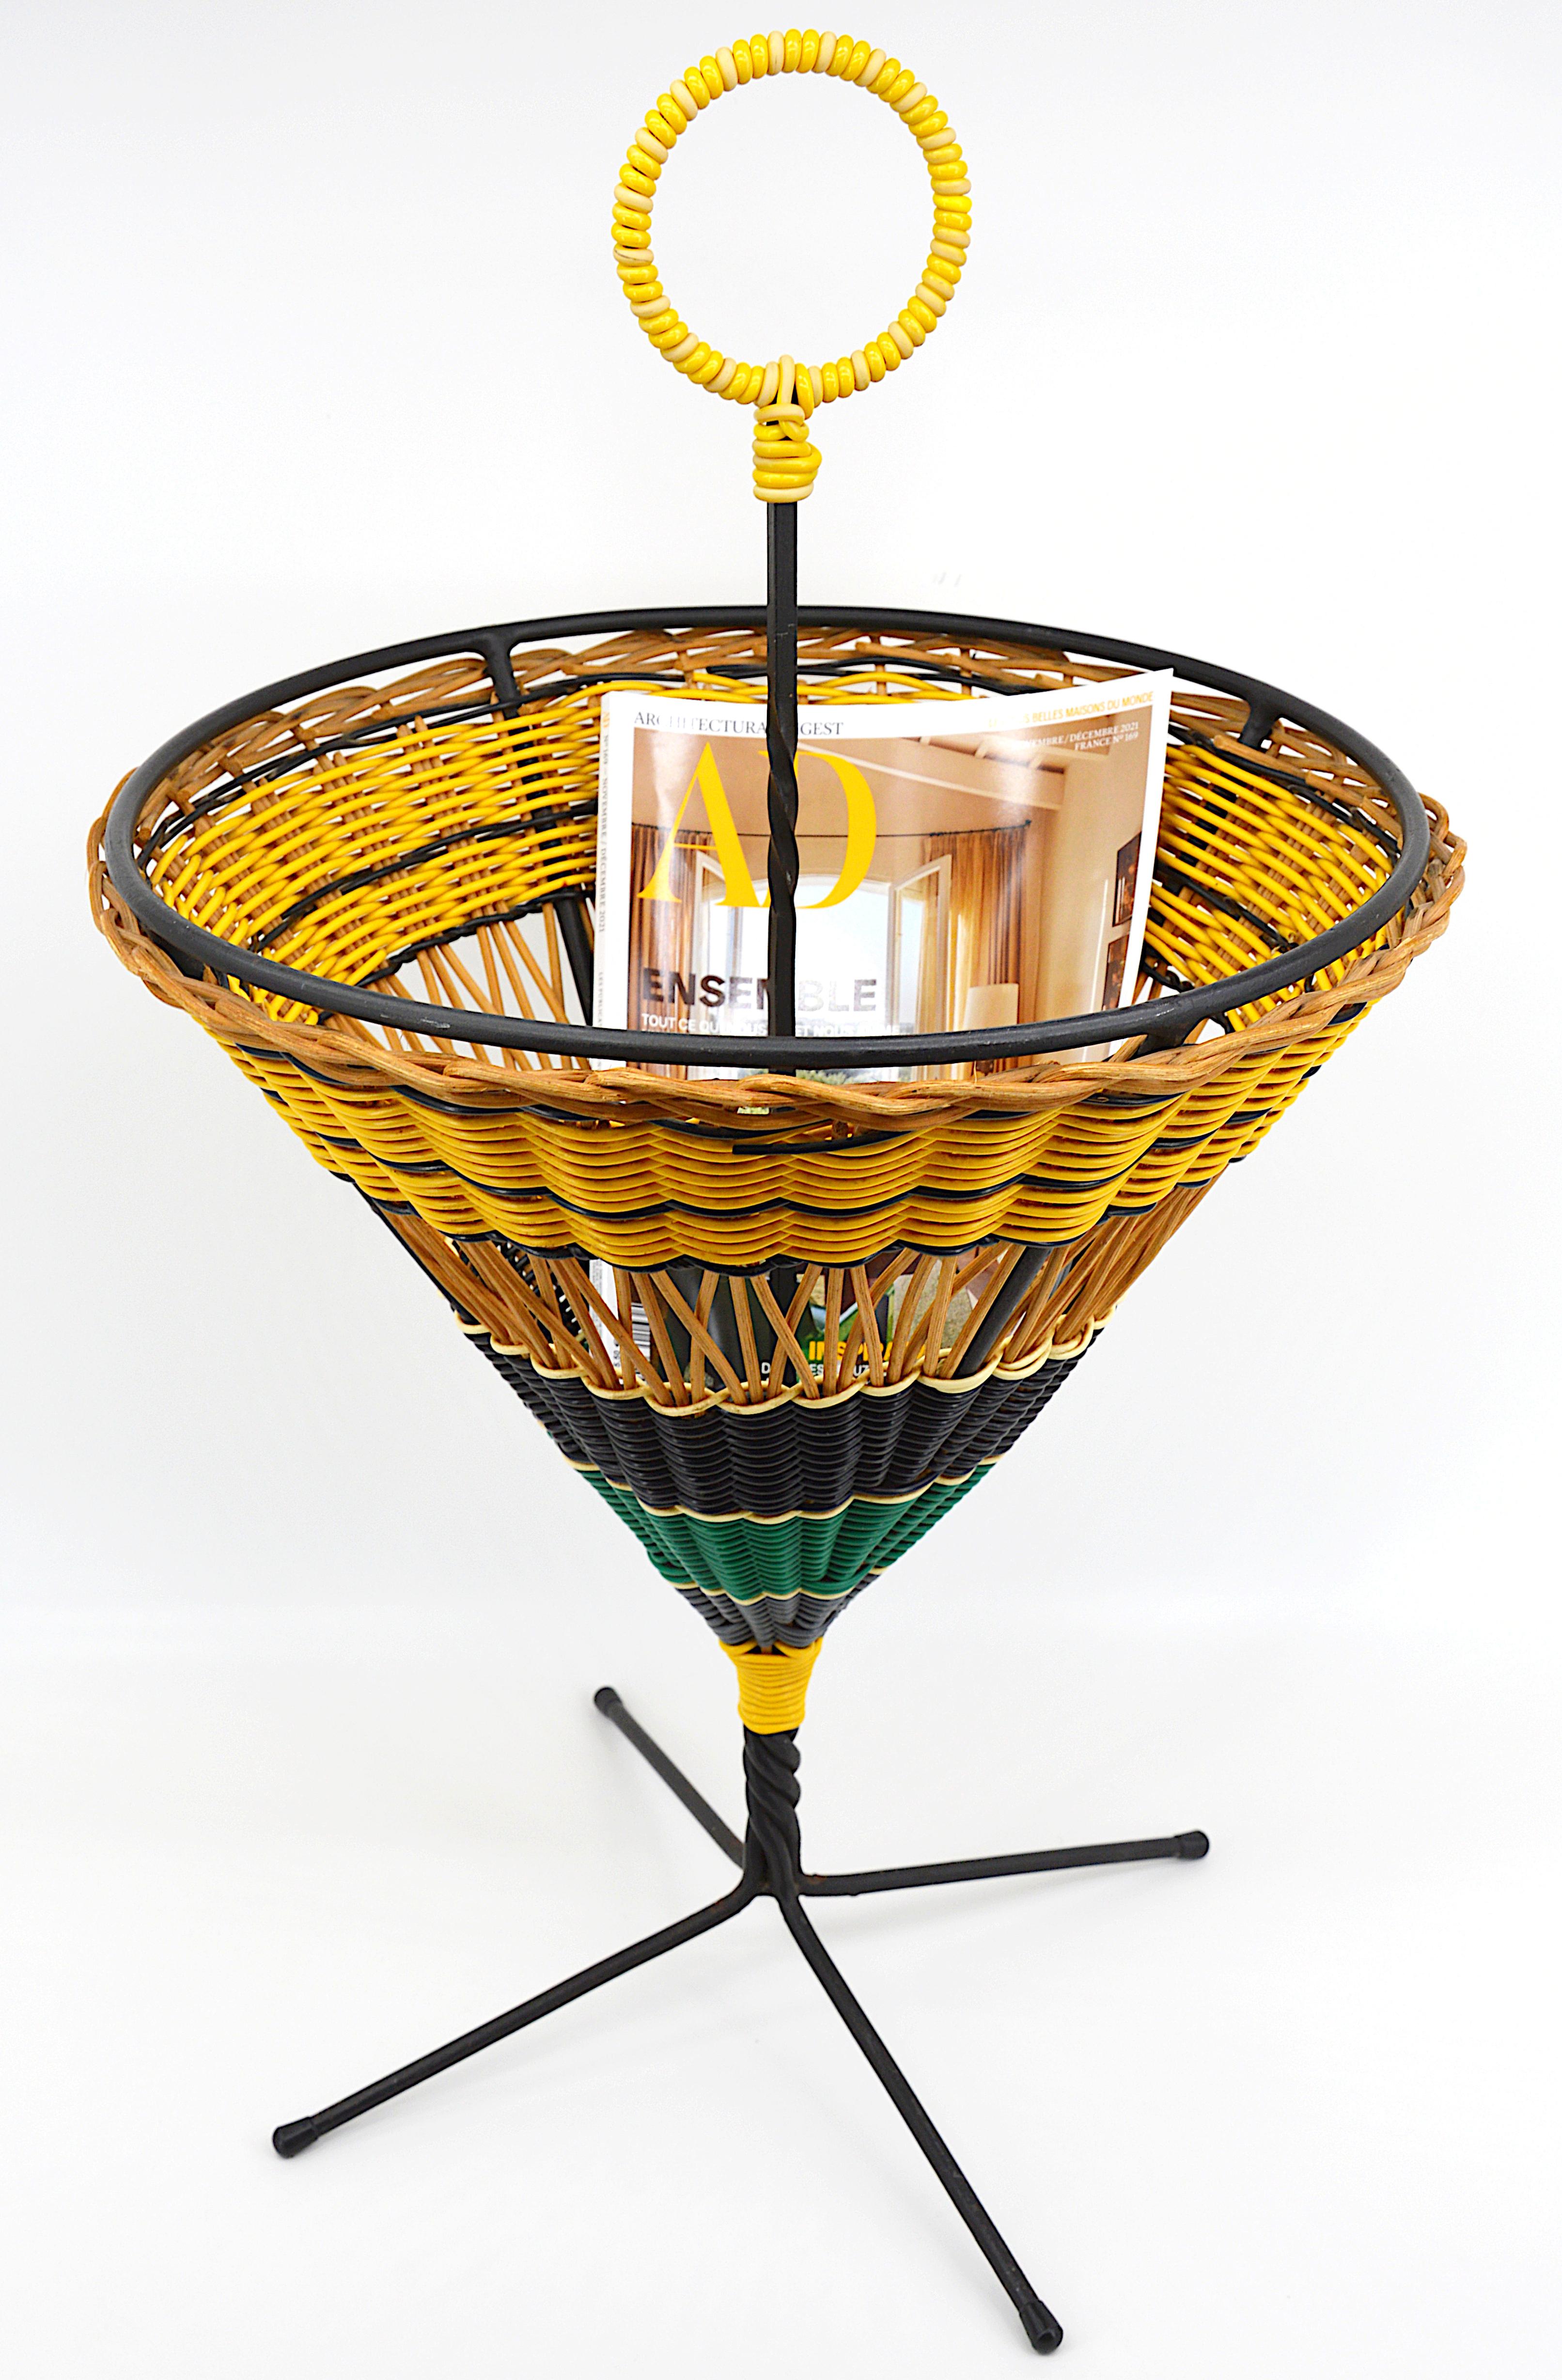 French mid-century circular magazine rack, France, 1950s. Rattan/wicker, plastic and iron. Measures: height : 27.6